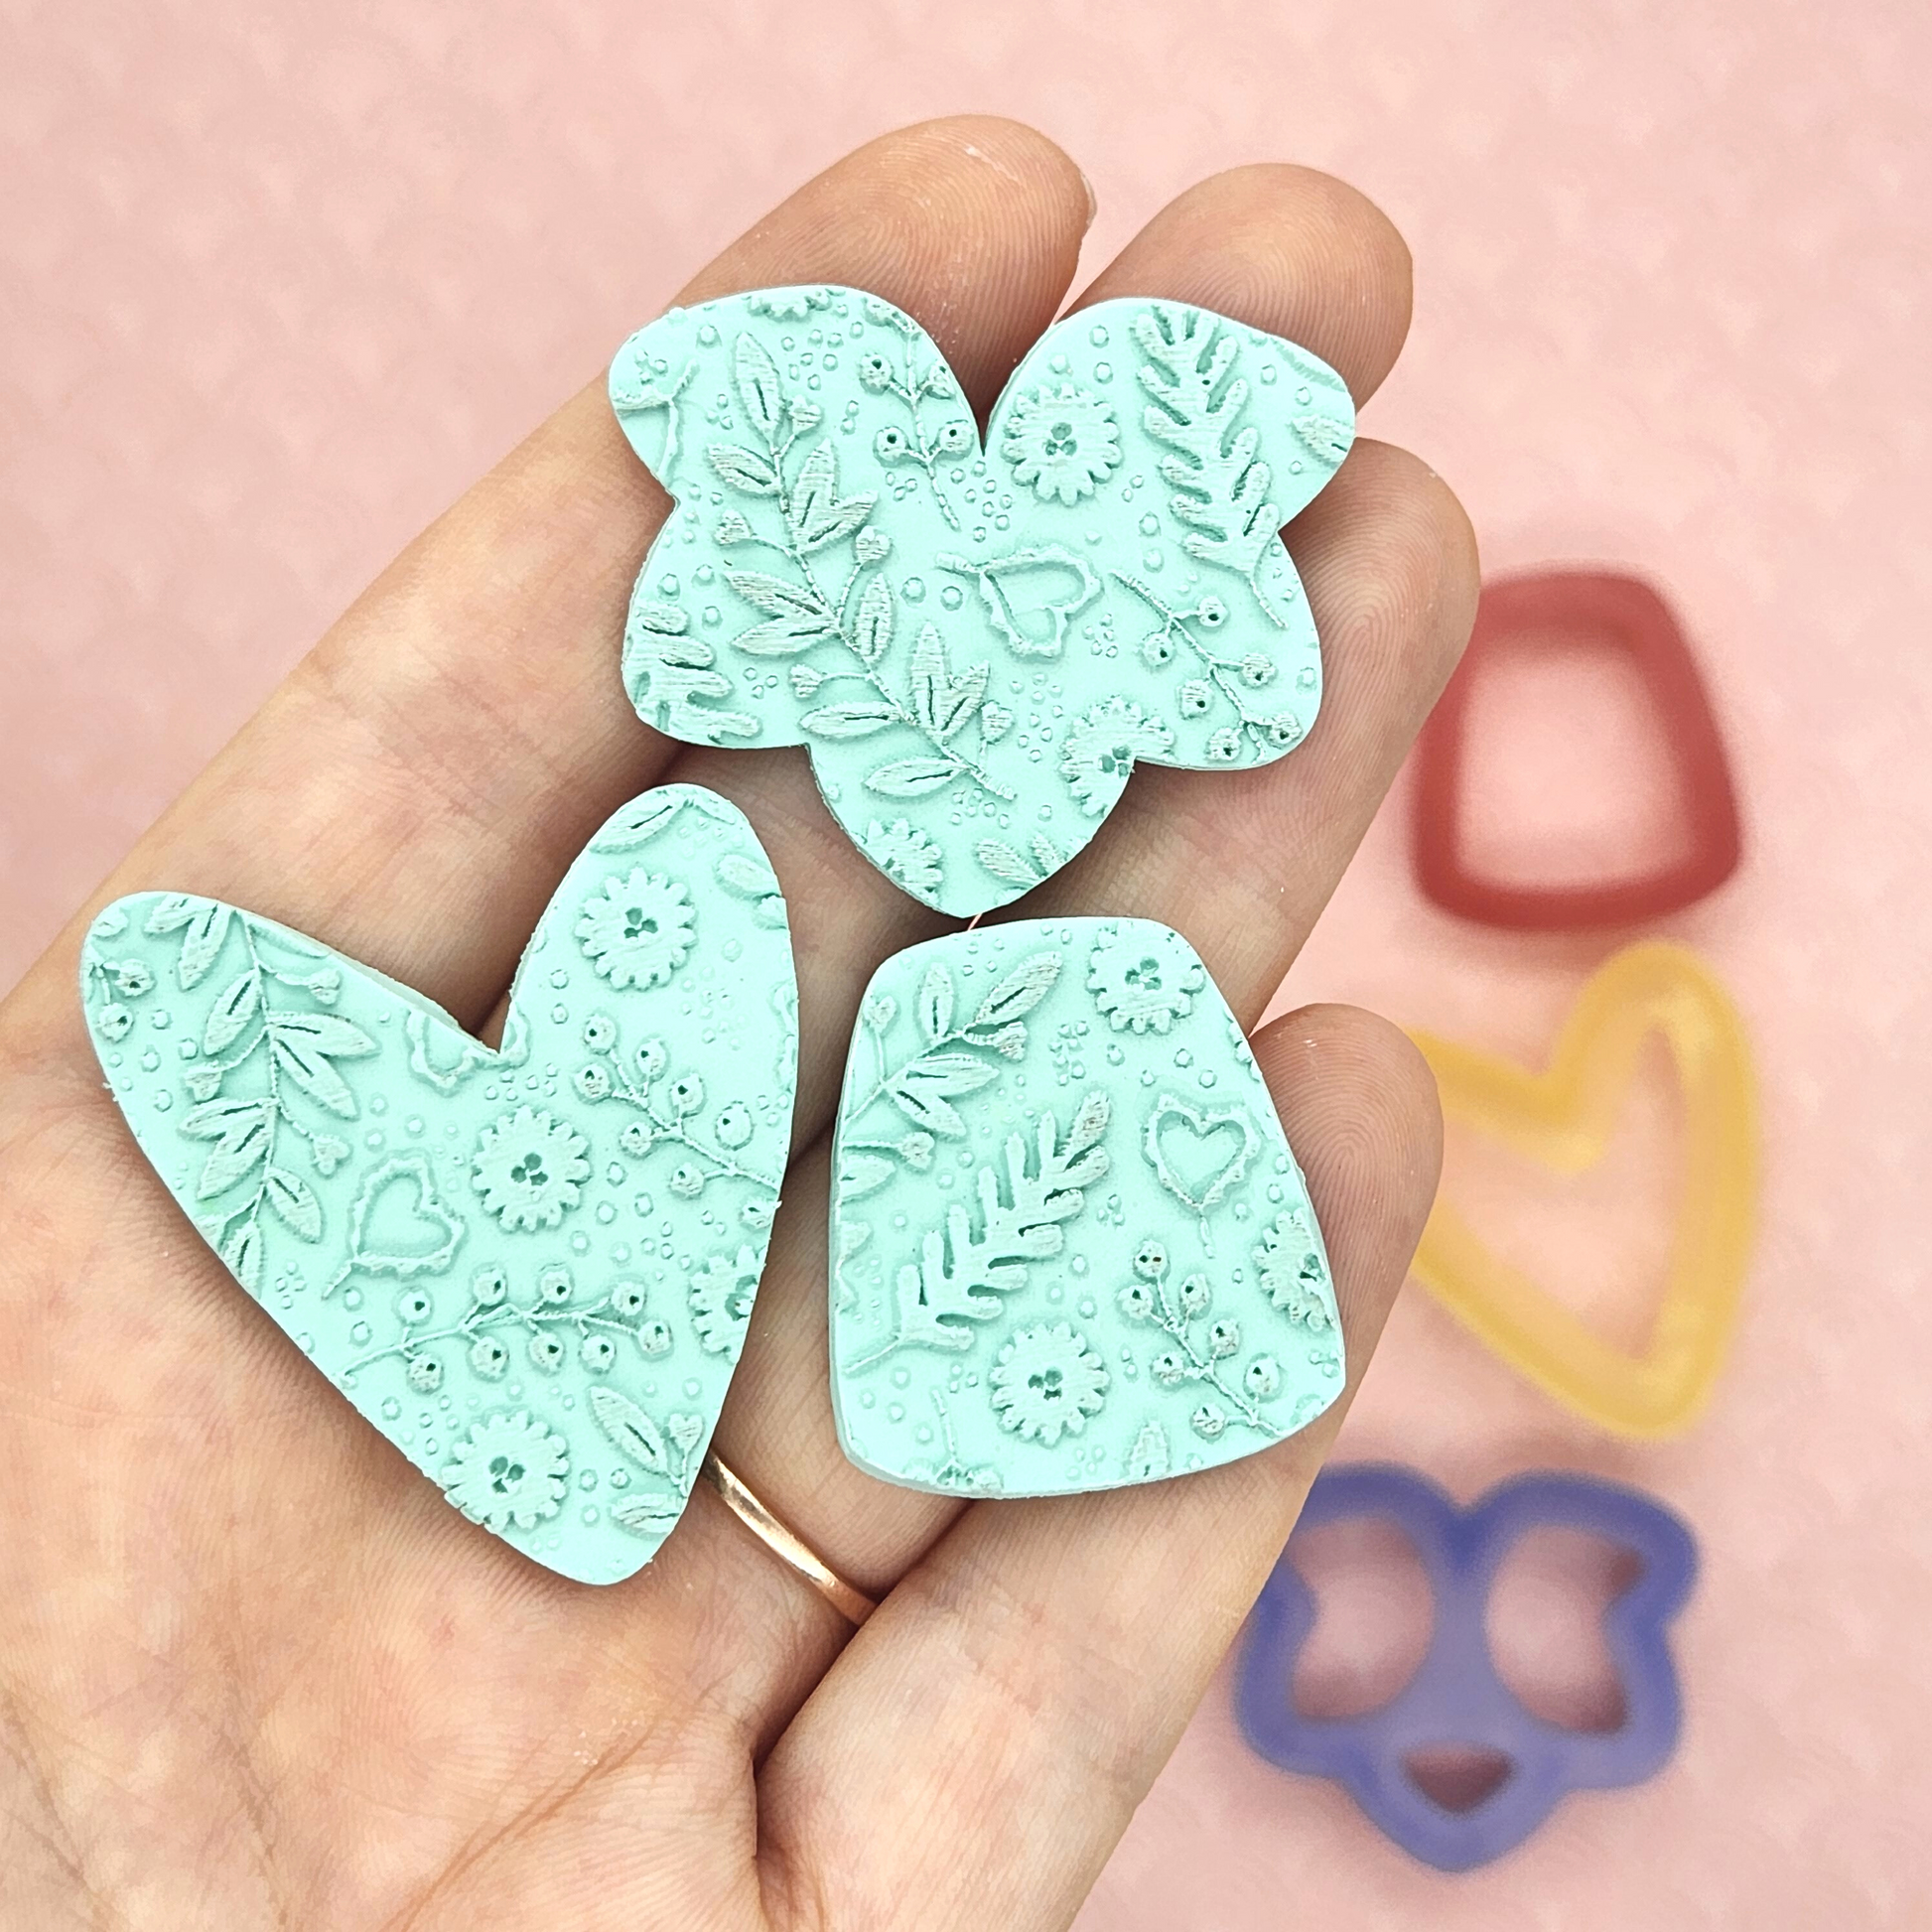 Creative Ways to Add Texture to Polymer Clay